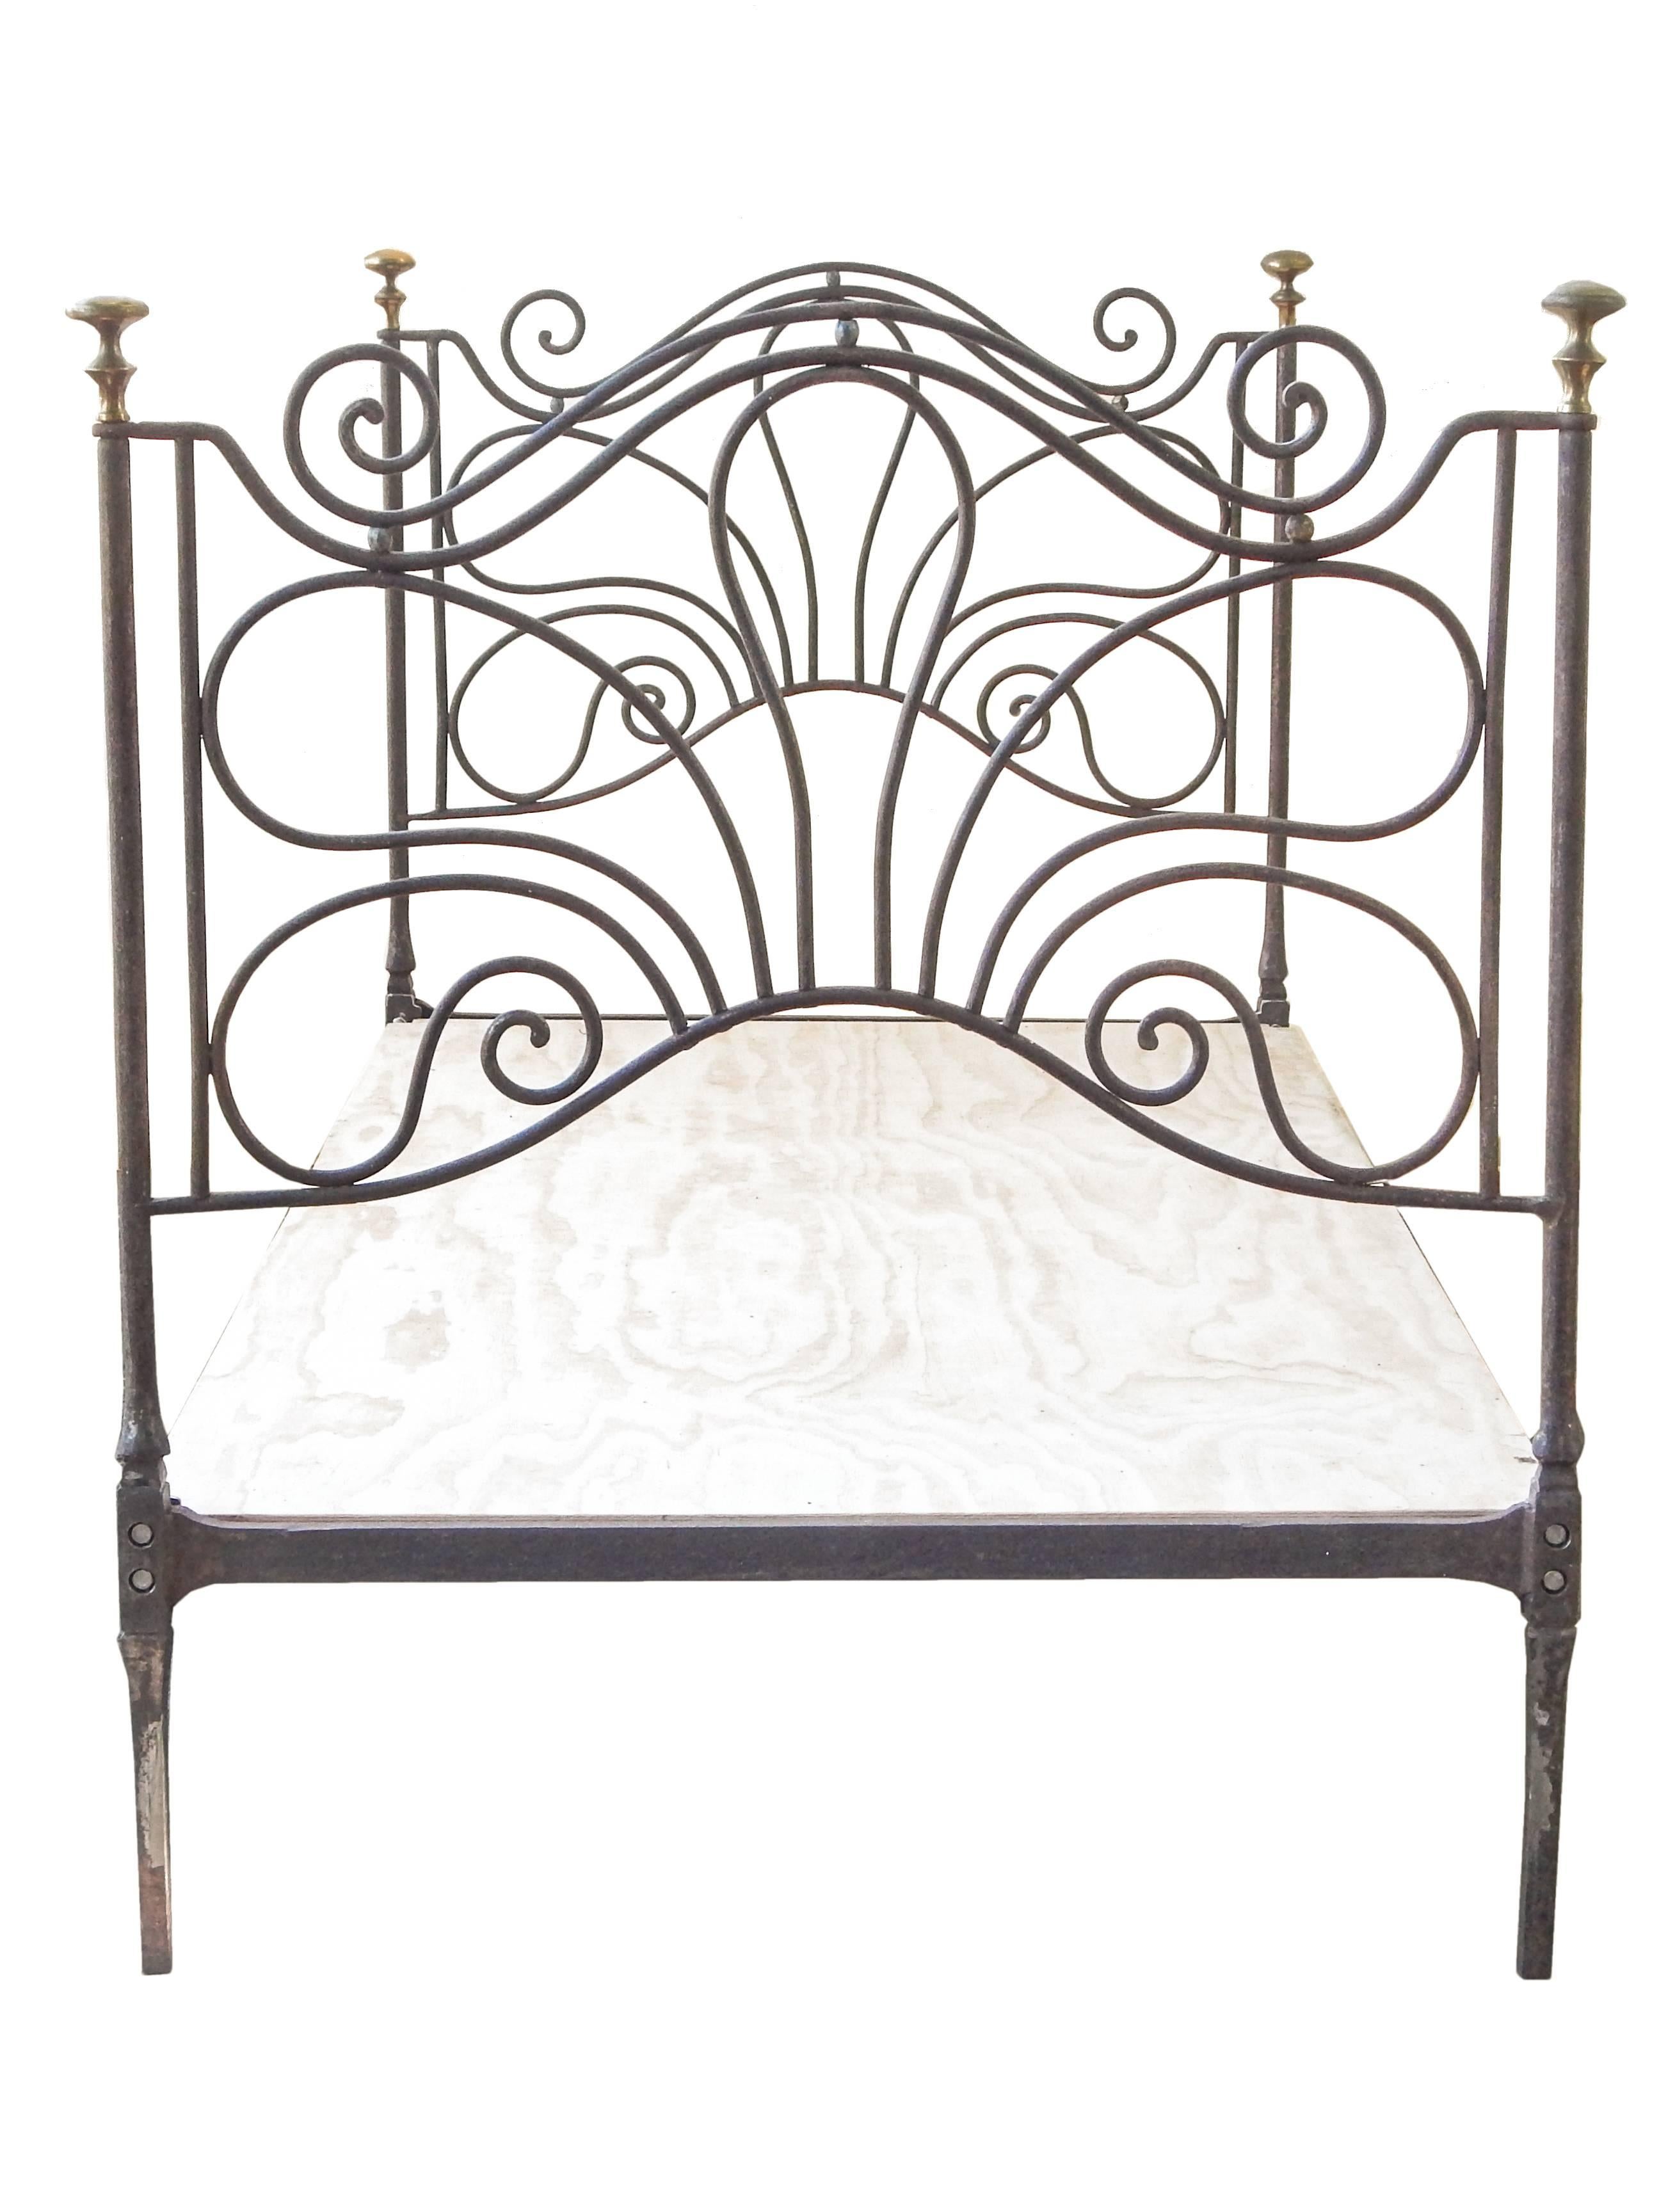 19th Century French Iron and Brass Daybed For Sale